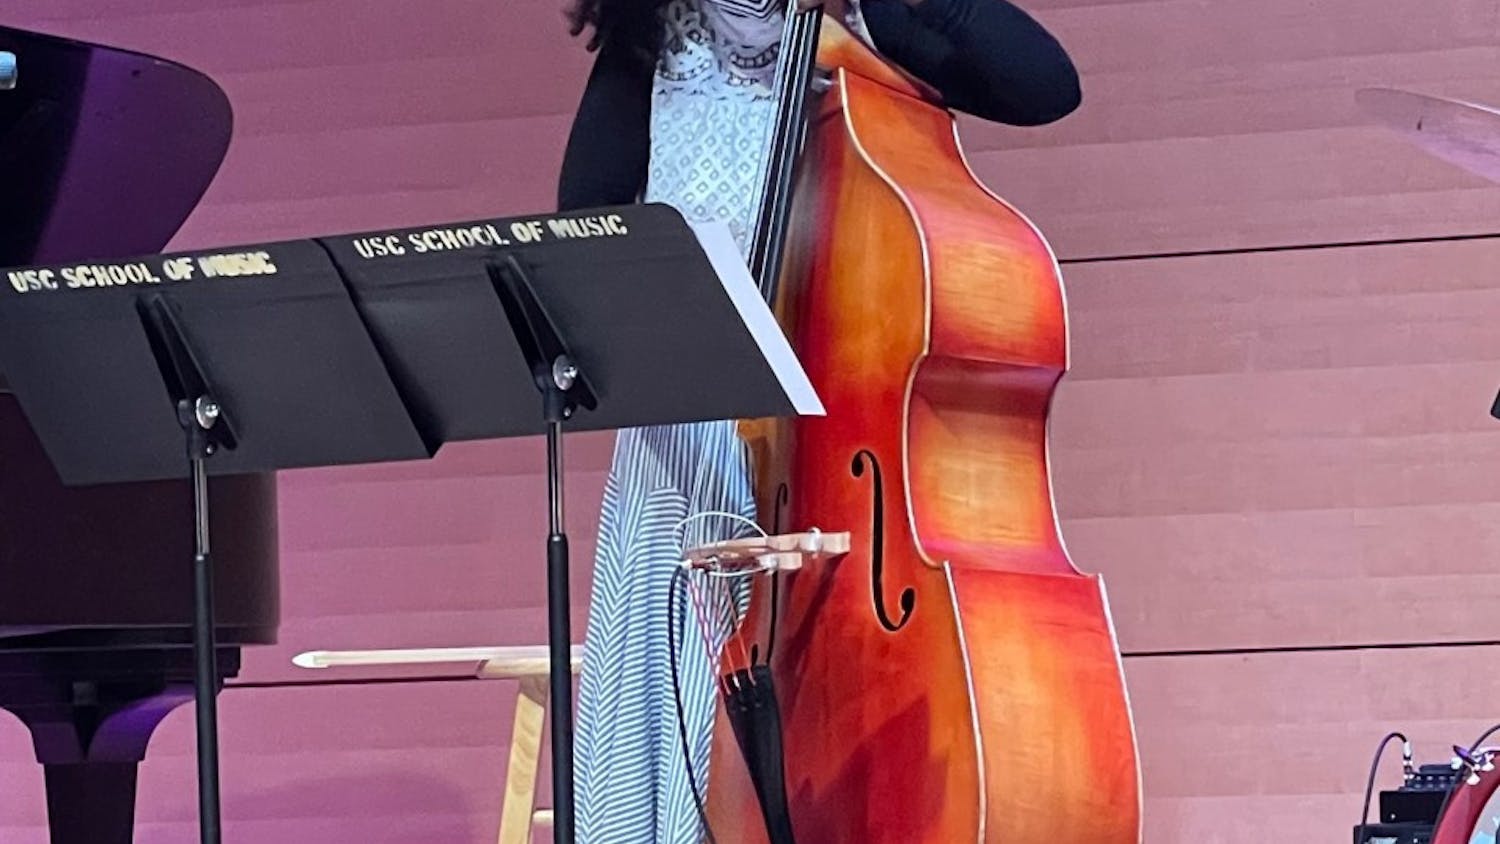 CC &amp; The Adelitas bass player Mimi Jones performs at the band's live debut concert on Oct. 25, 2021, at the Darla Moore School of Business Johnson Performance Hall. The all-female, professor-led band represents intersectionality and embraces Mexican culture in jazz music.